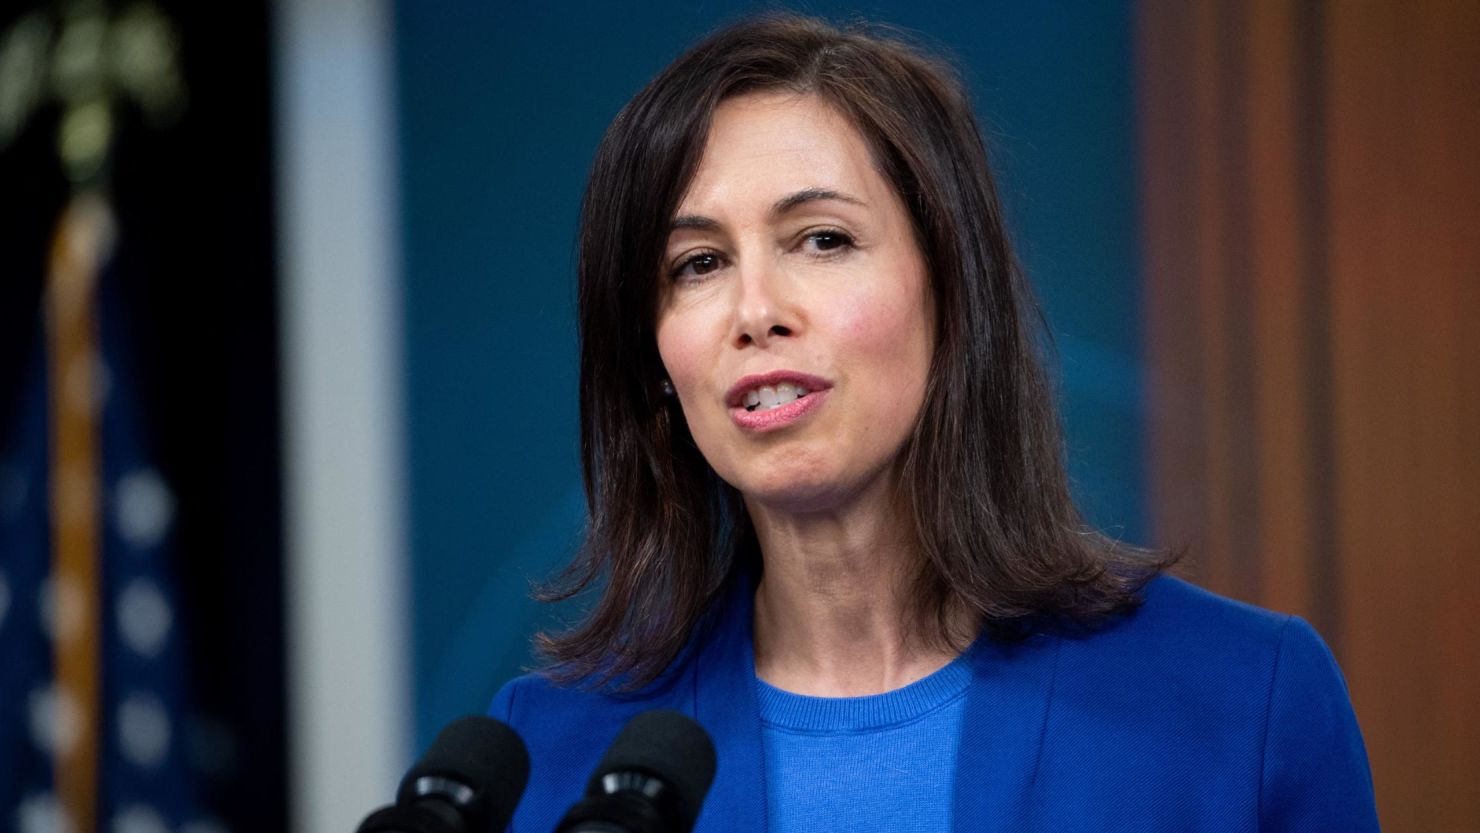 FCC Chairwoman Jessica Rosenworcel speaks during an event in Washington, DC, February 14, 2022.